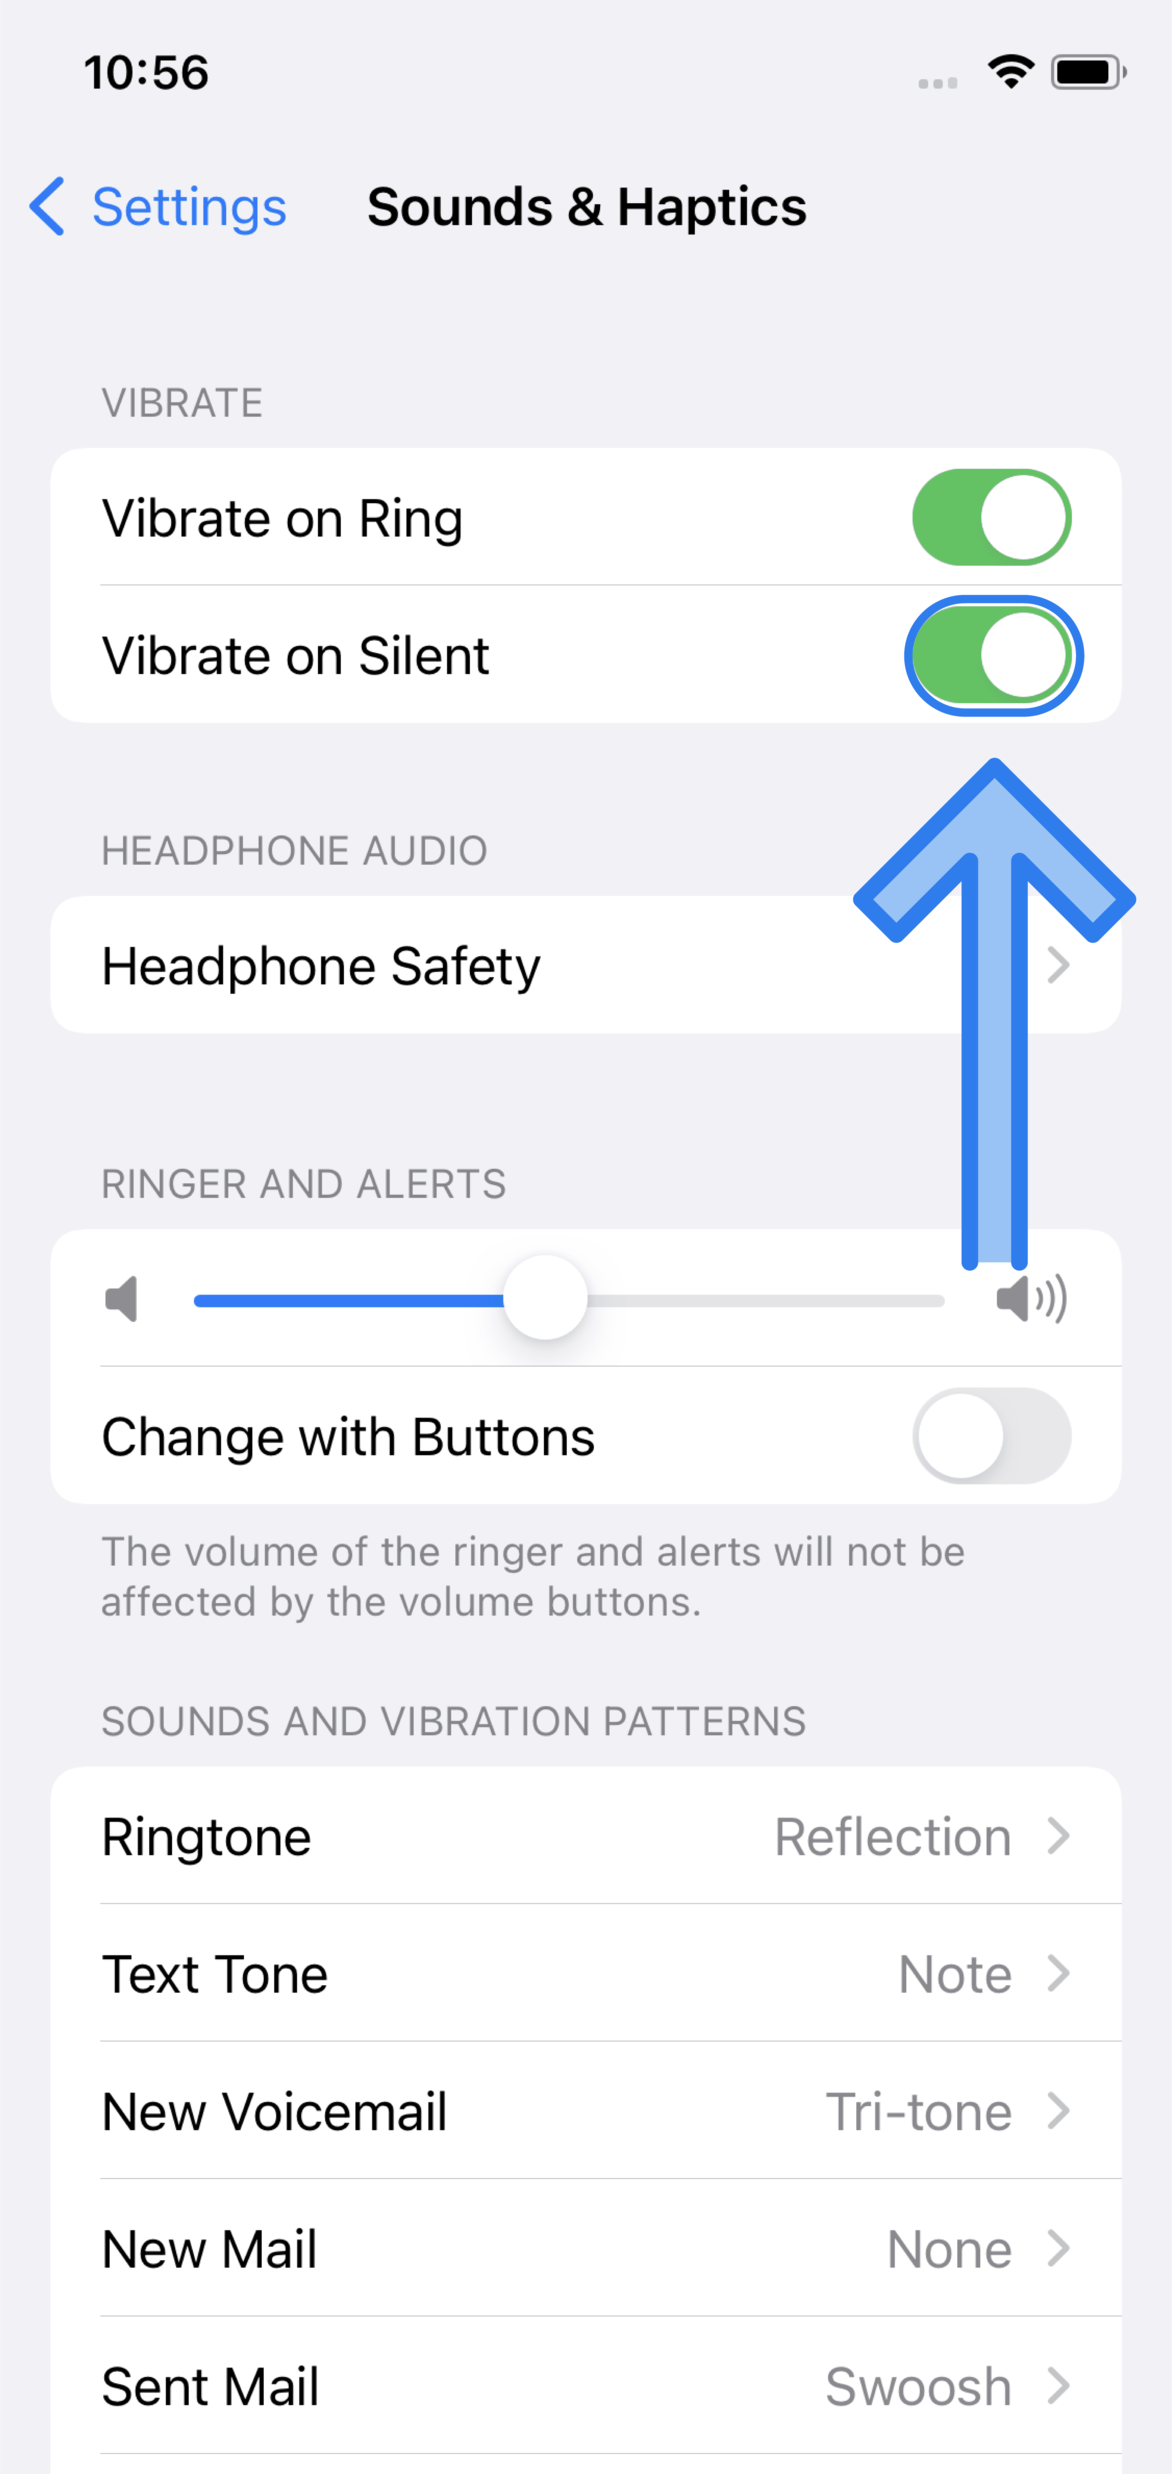 Toggle on the ‘Vibrate on silent’ option